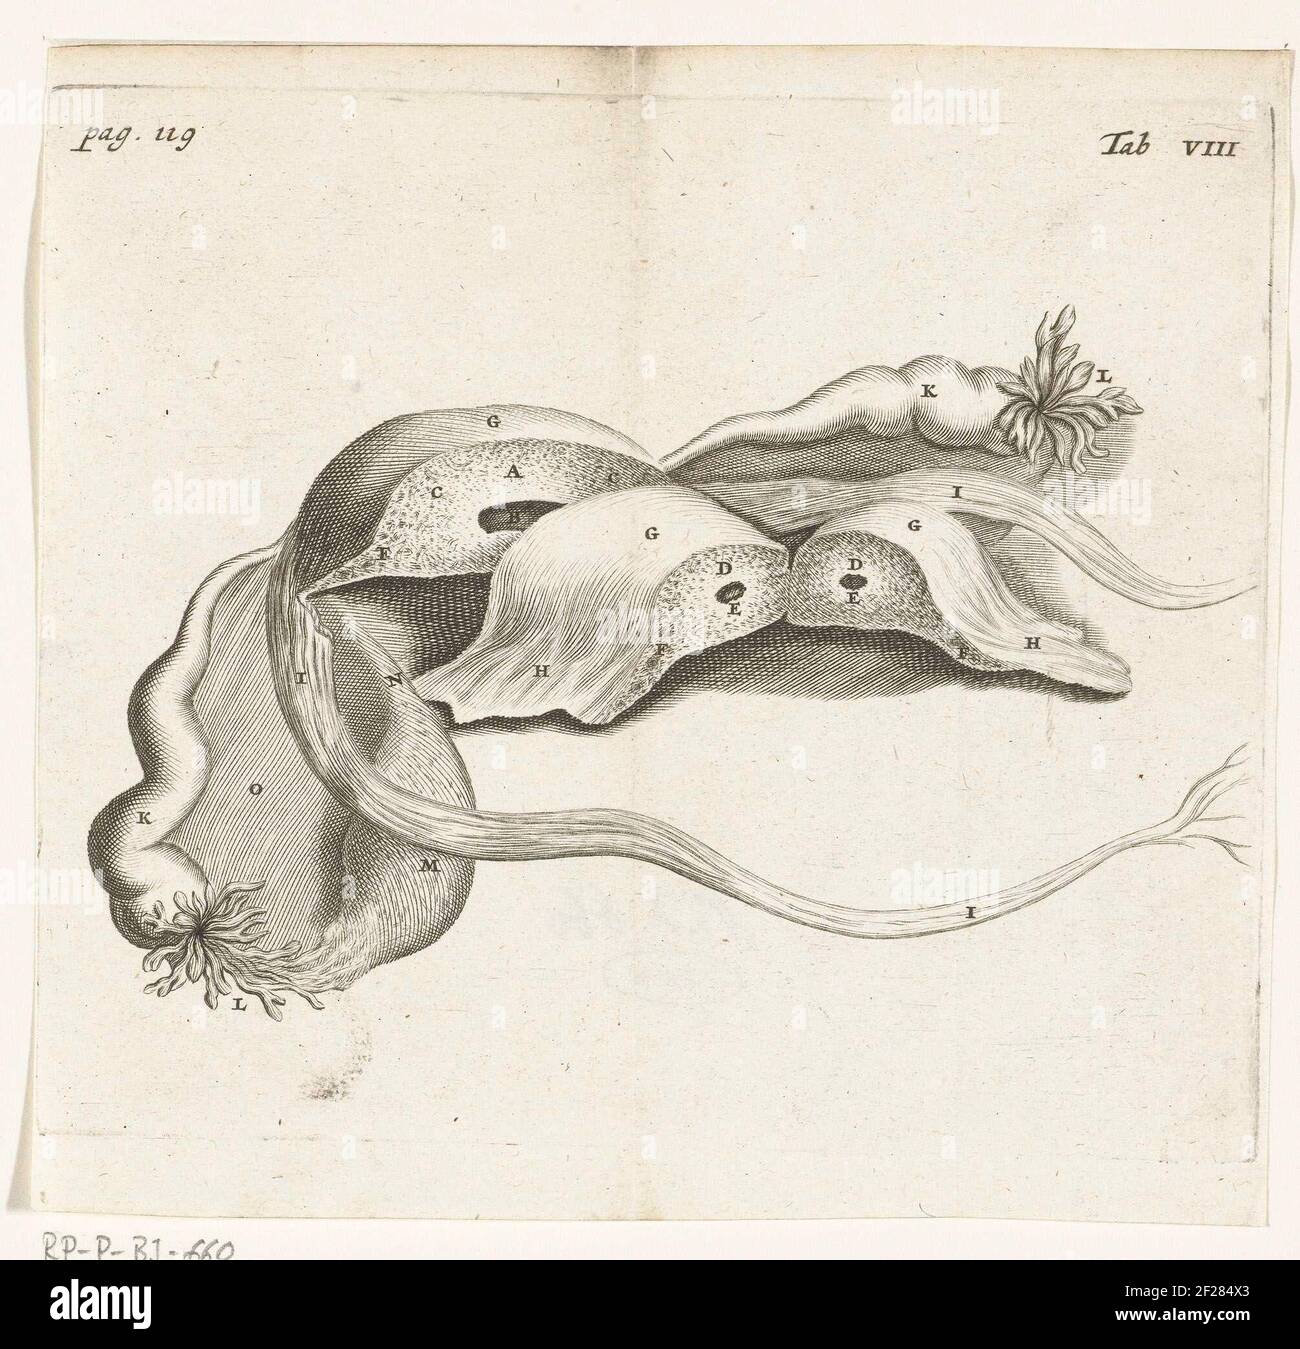 Anatomical depiction of an ectopic pregnancy.In 1672 physician and anatomist Reinier de Graaf published De mulierum organis, a book about the organs of the female body, with prints by Hendrik Bary. De Graaf was the first to conclude that a foetus grows from the mother’s egg cell after it is fertilised by the father’s seed. He also discusses anomalies such as ectopic pregnancies (when the fertilised egg implants outside the womb). Stock Photo